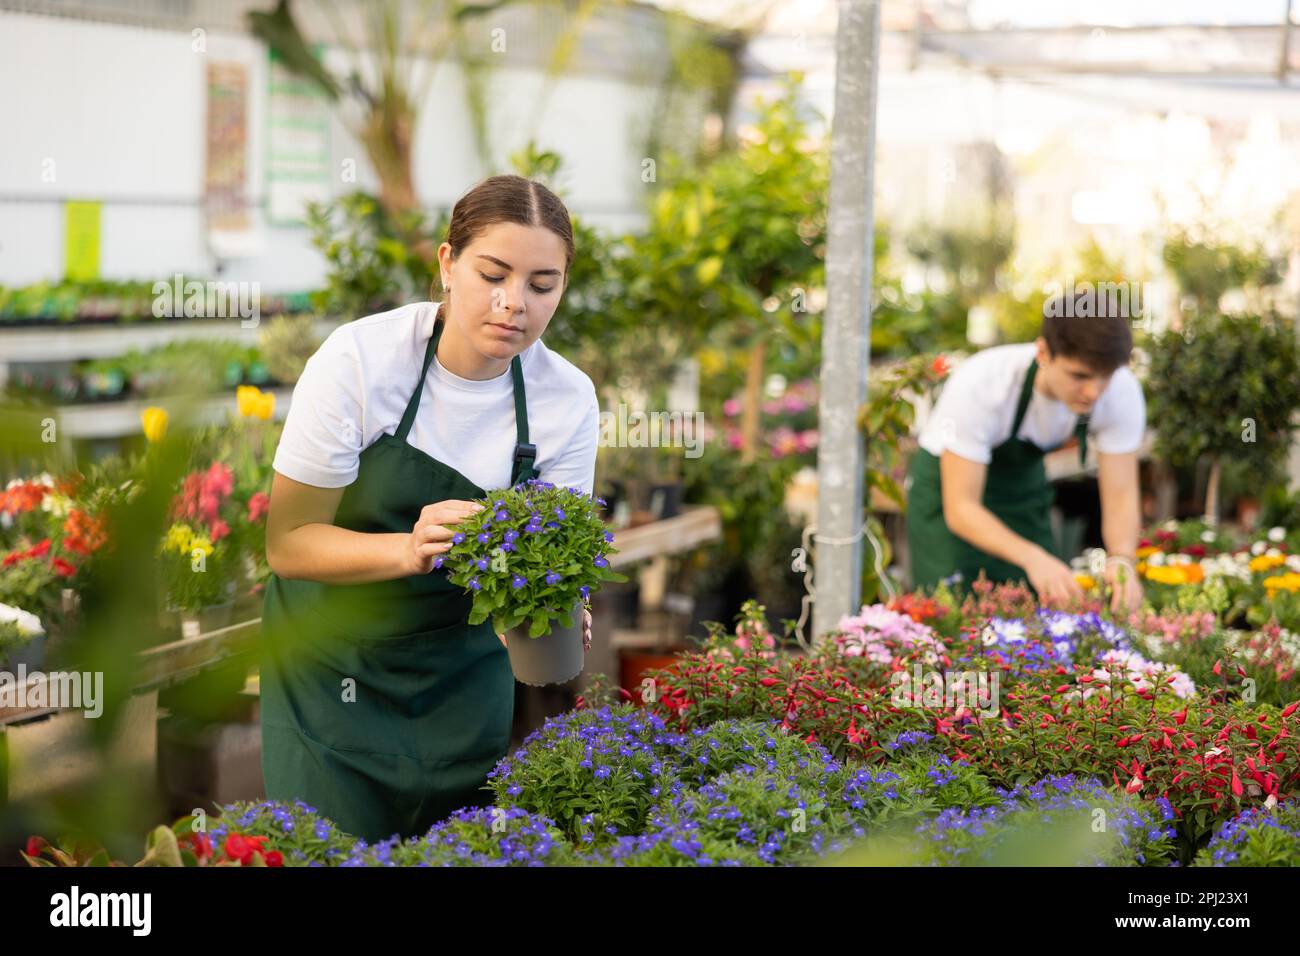 Female vendor in flower shop inspects price tags on pots with lobelia plants and re-evaluates goods Stock Photo